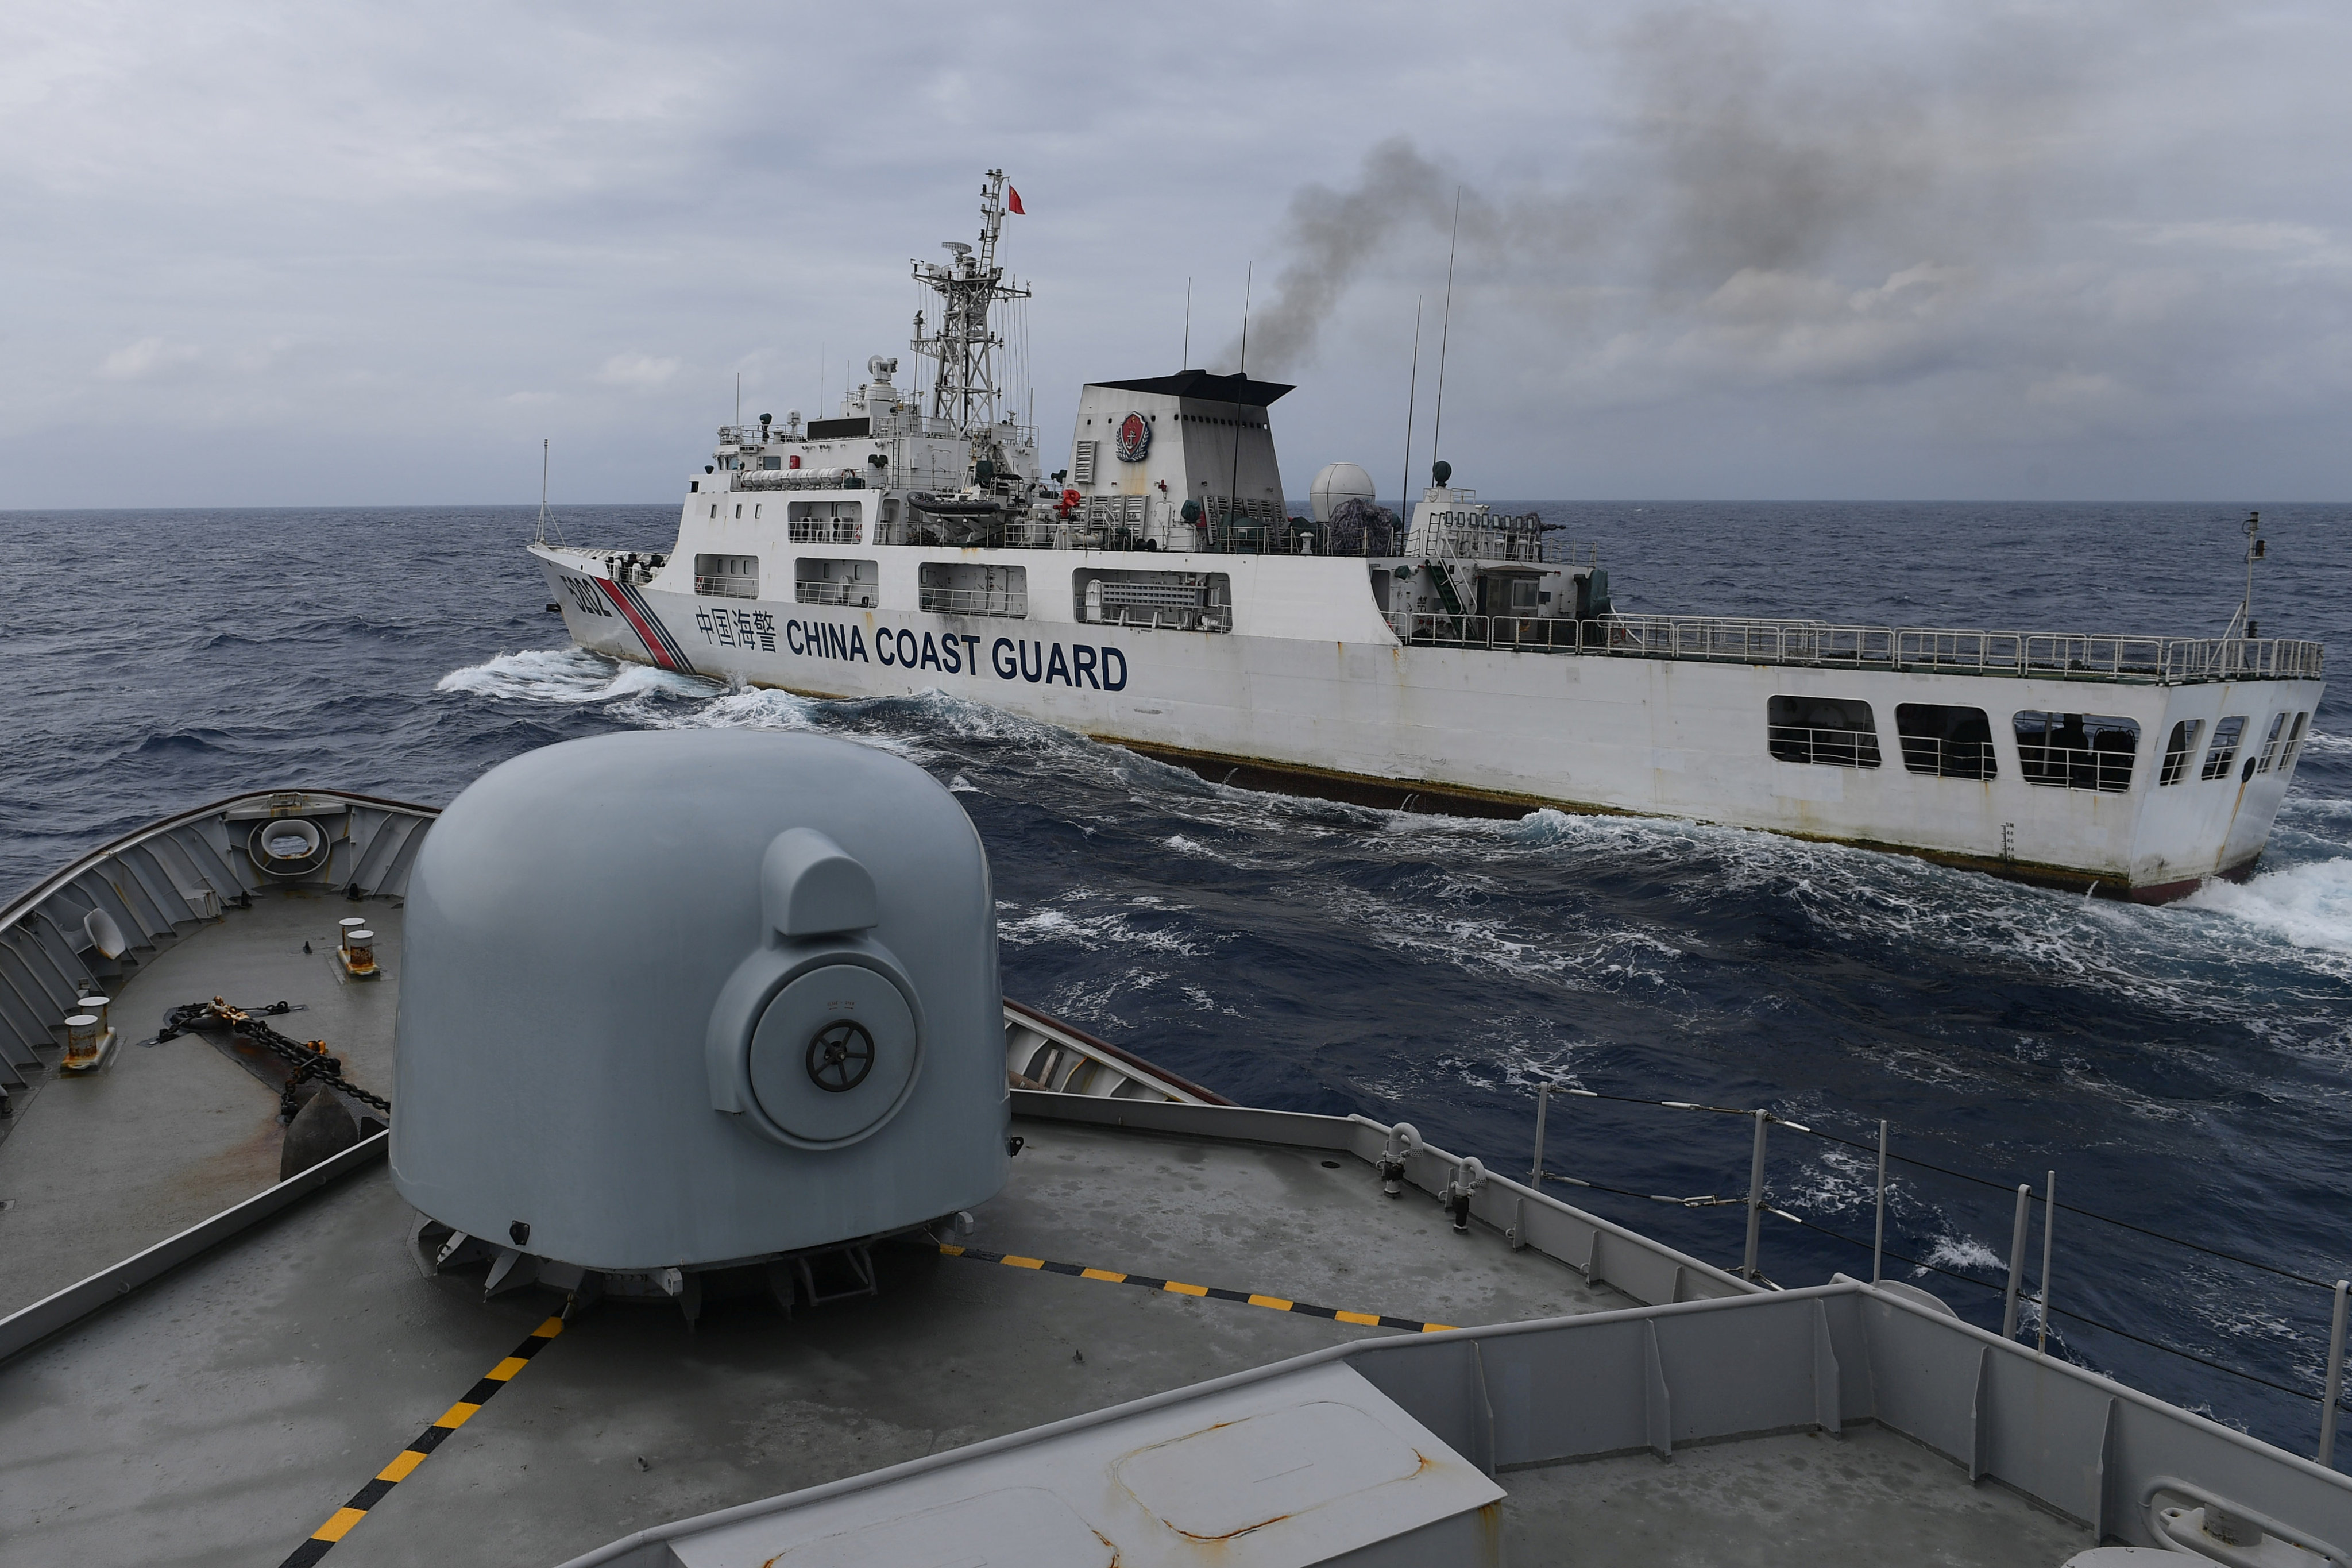 A China Coast Guard ship is seen from an Indonesian naval vessel during a patrol at Indonesia’s exclusive economic zone sea north of the Natuna Islands in January 2020. Photo: Antara Foto via Reuters